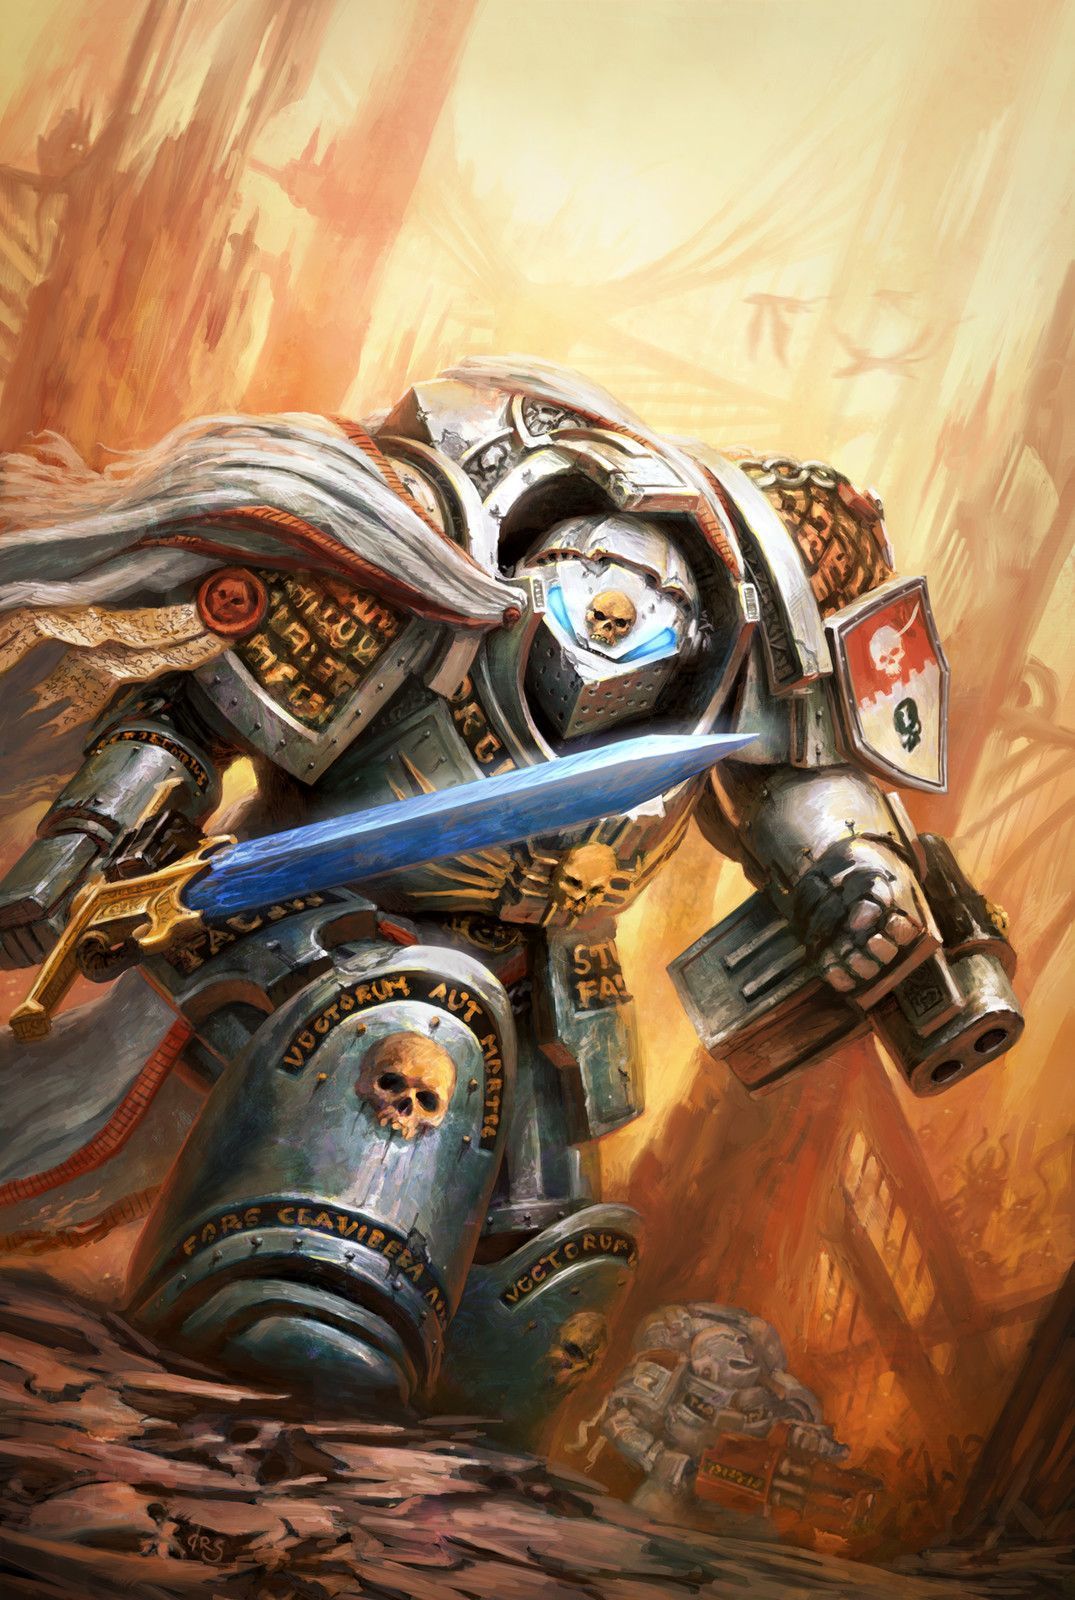 Which faction is known for its resistance against enemy psychic powers in Warhammer 40K?